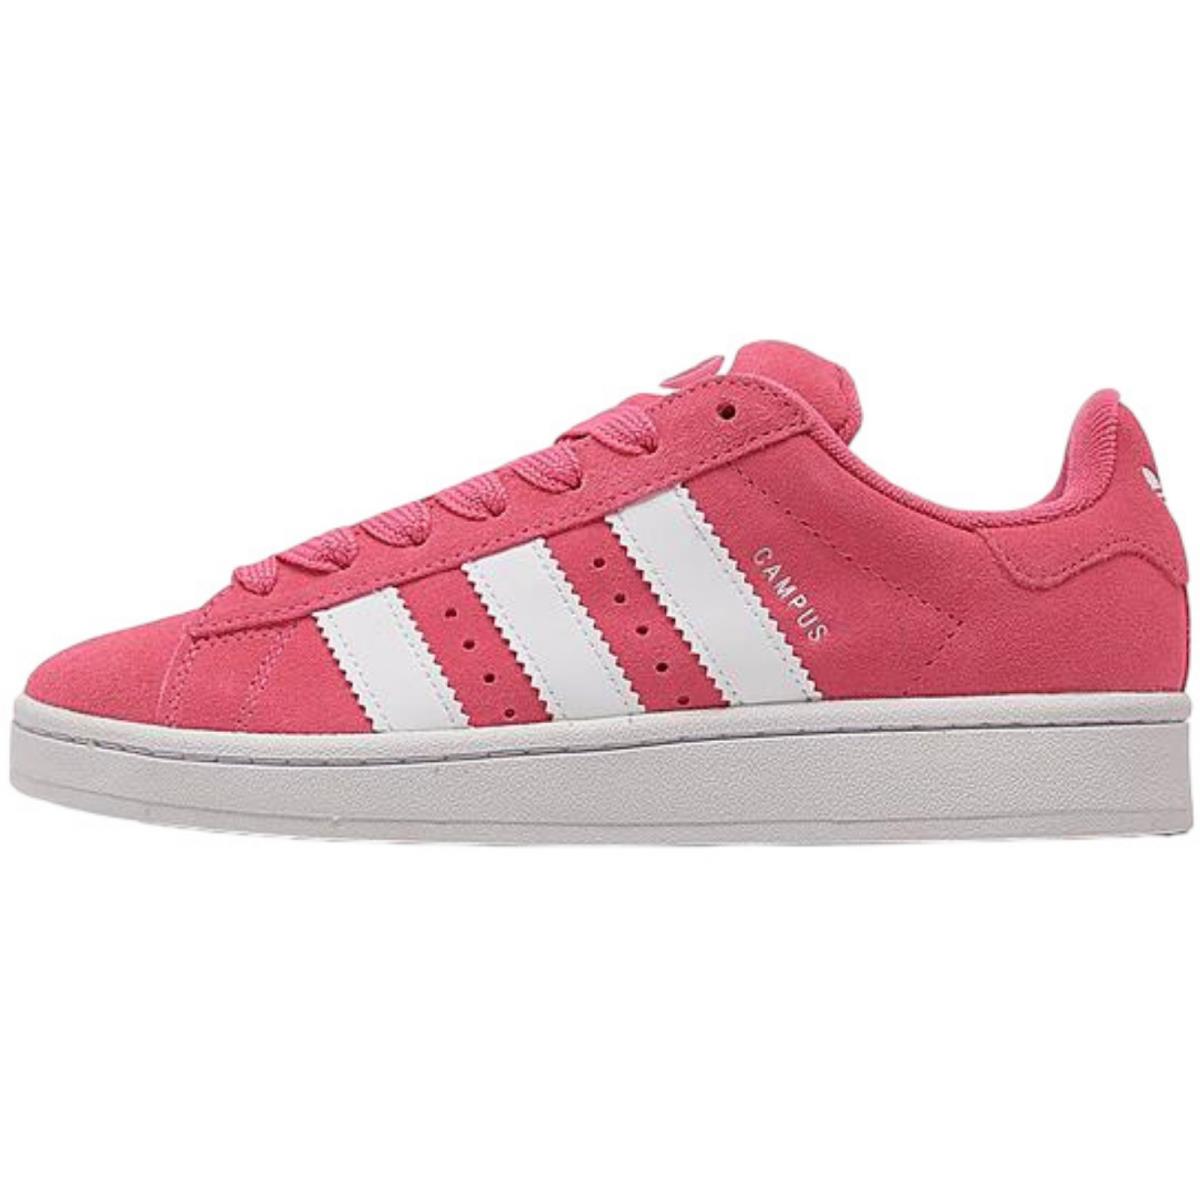 Adidas Originals Campus 00s Women`s Shoes Pink Fusion White US Szs 6-11 - Pink Fusion/Footwear White/Footwear White